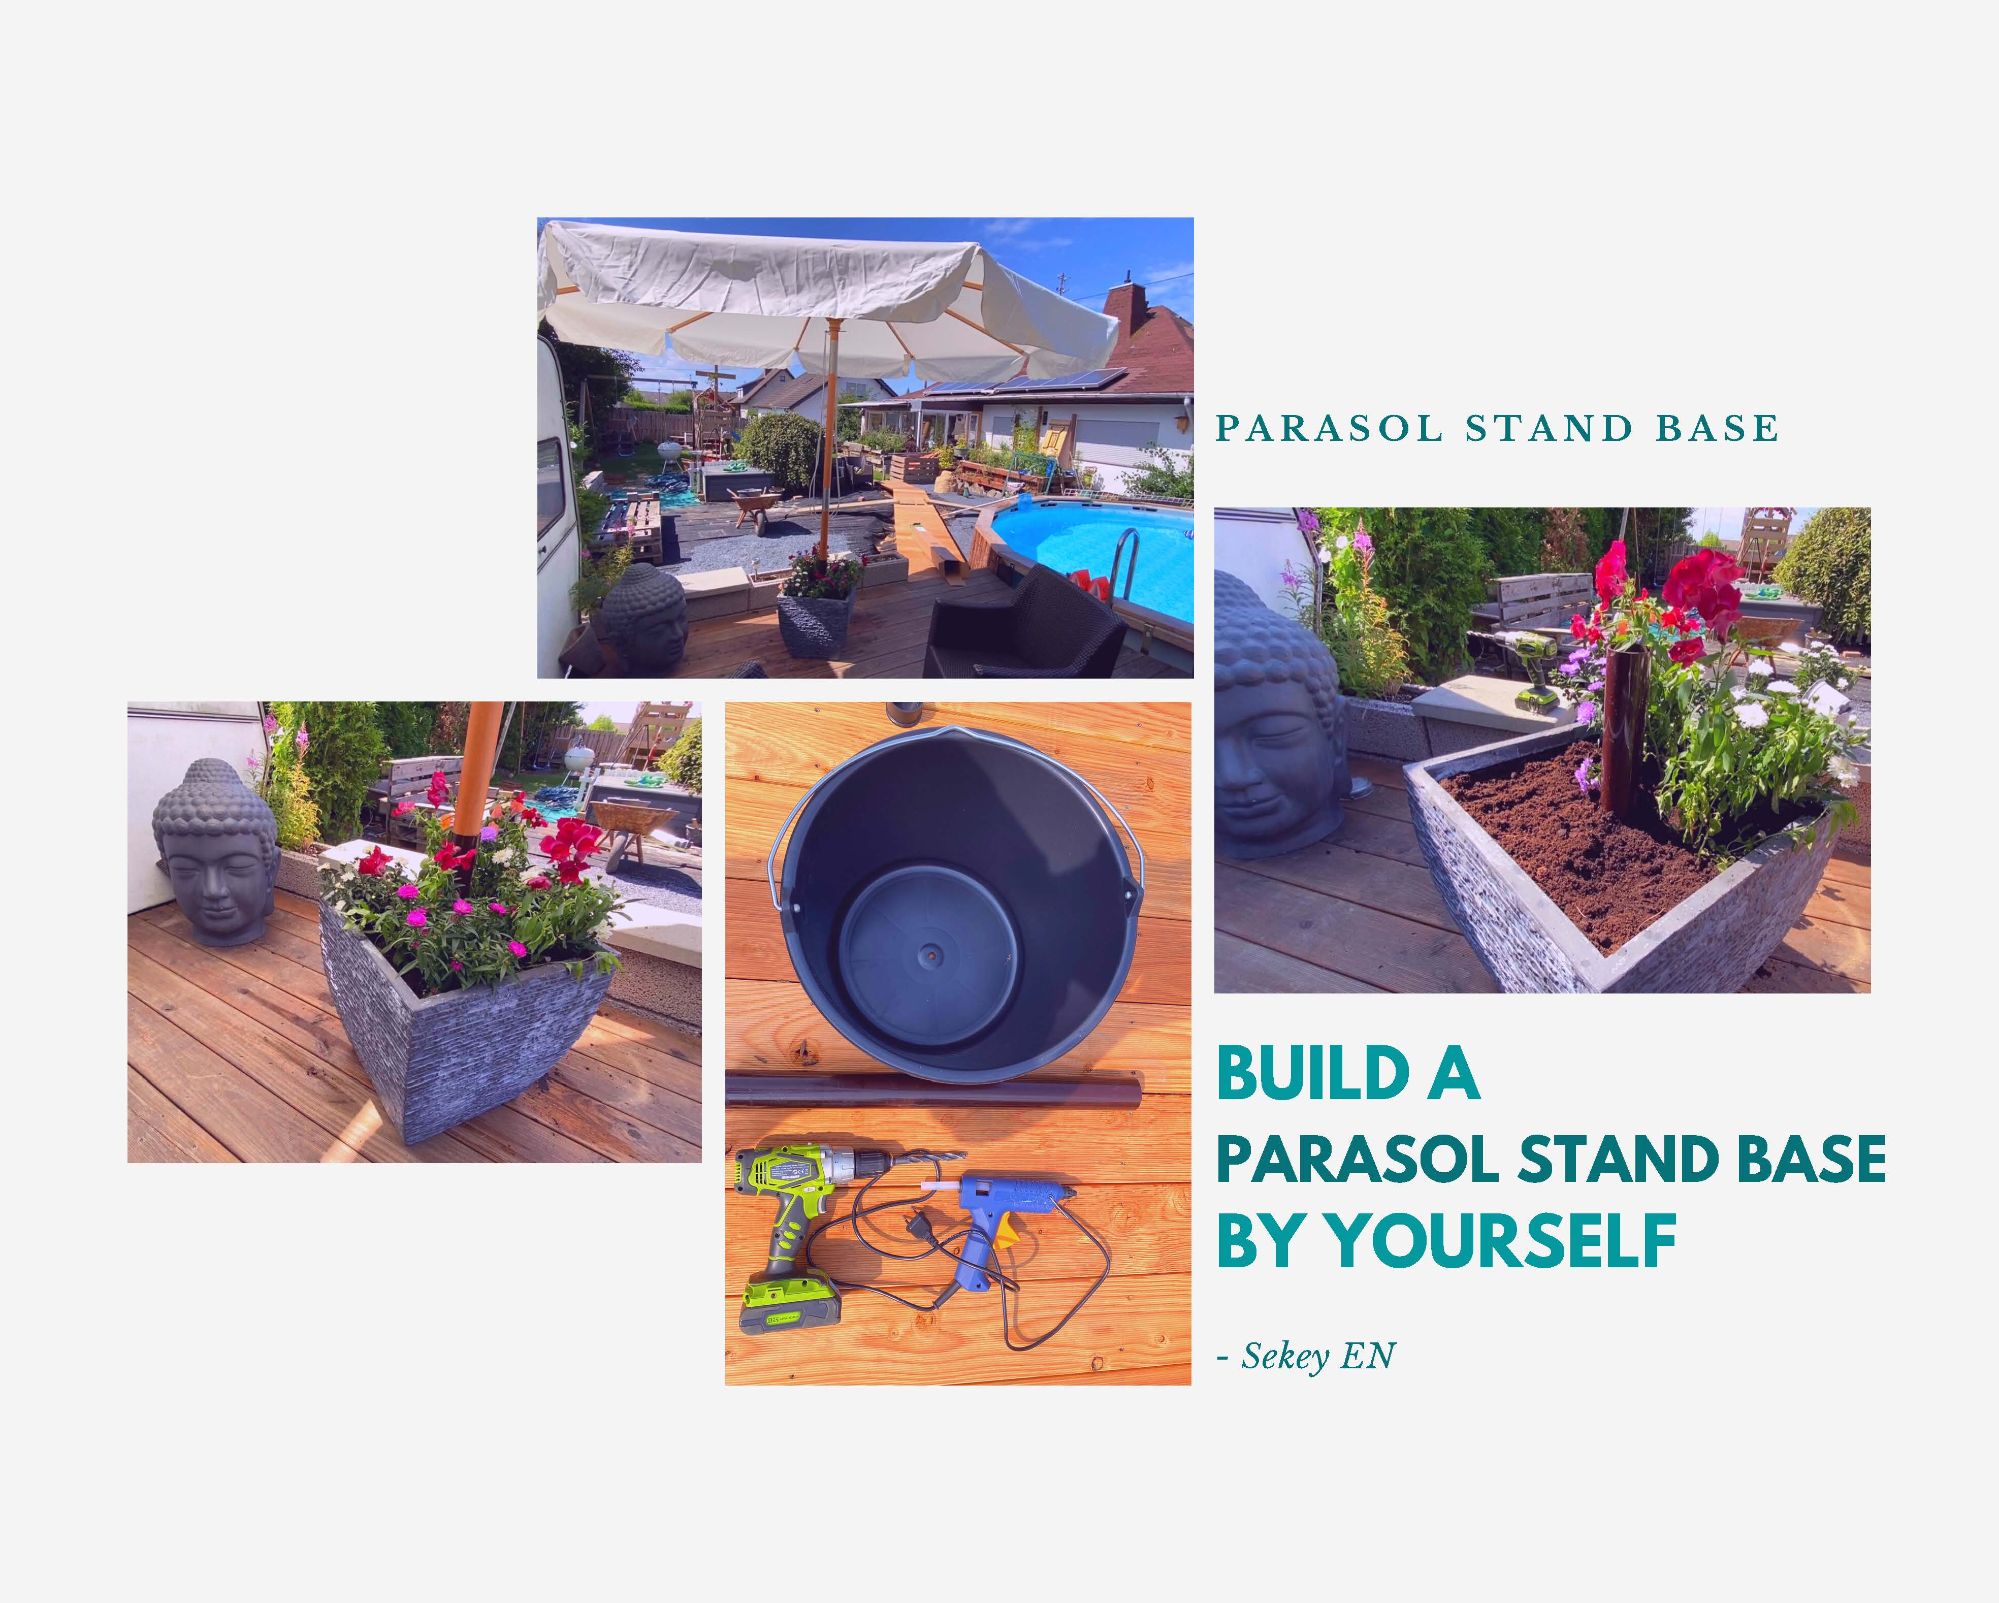 Build a parasol stand by yourself